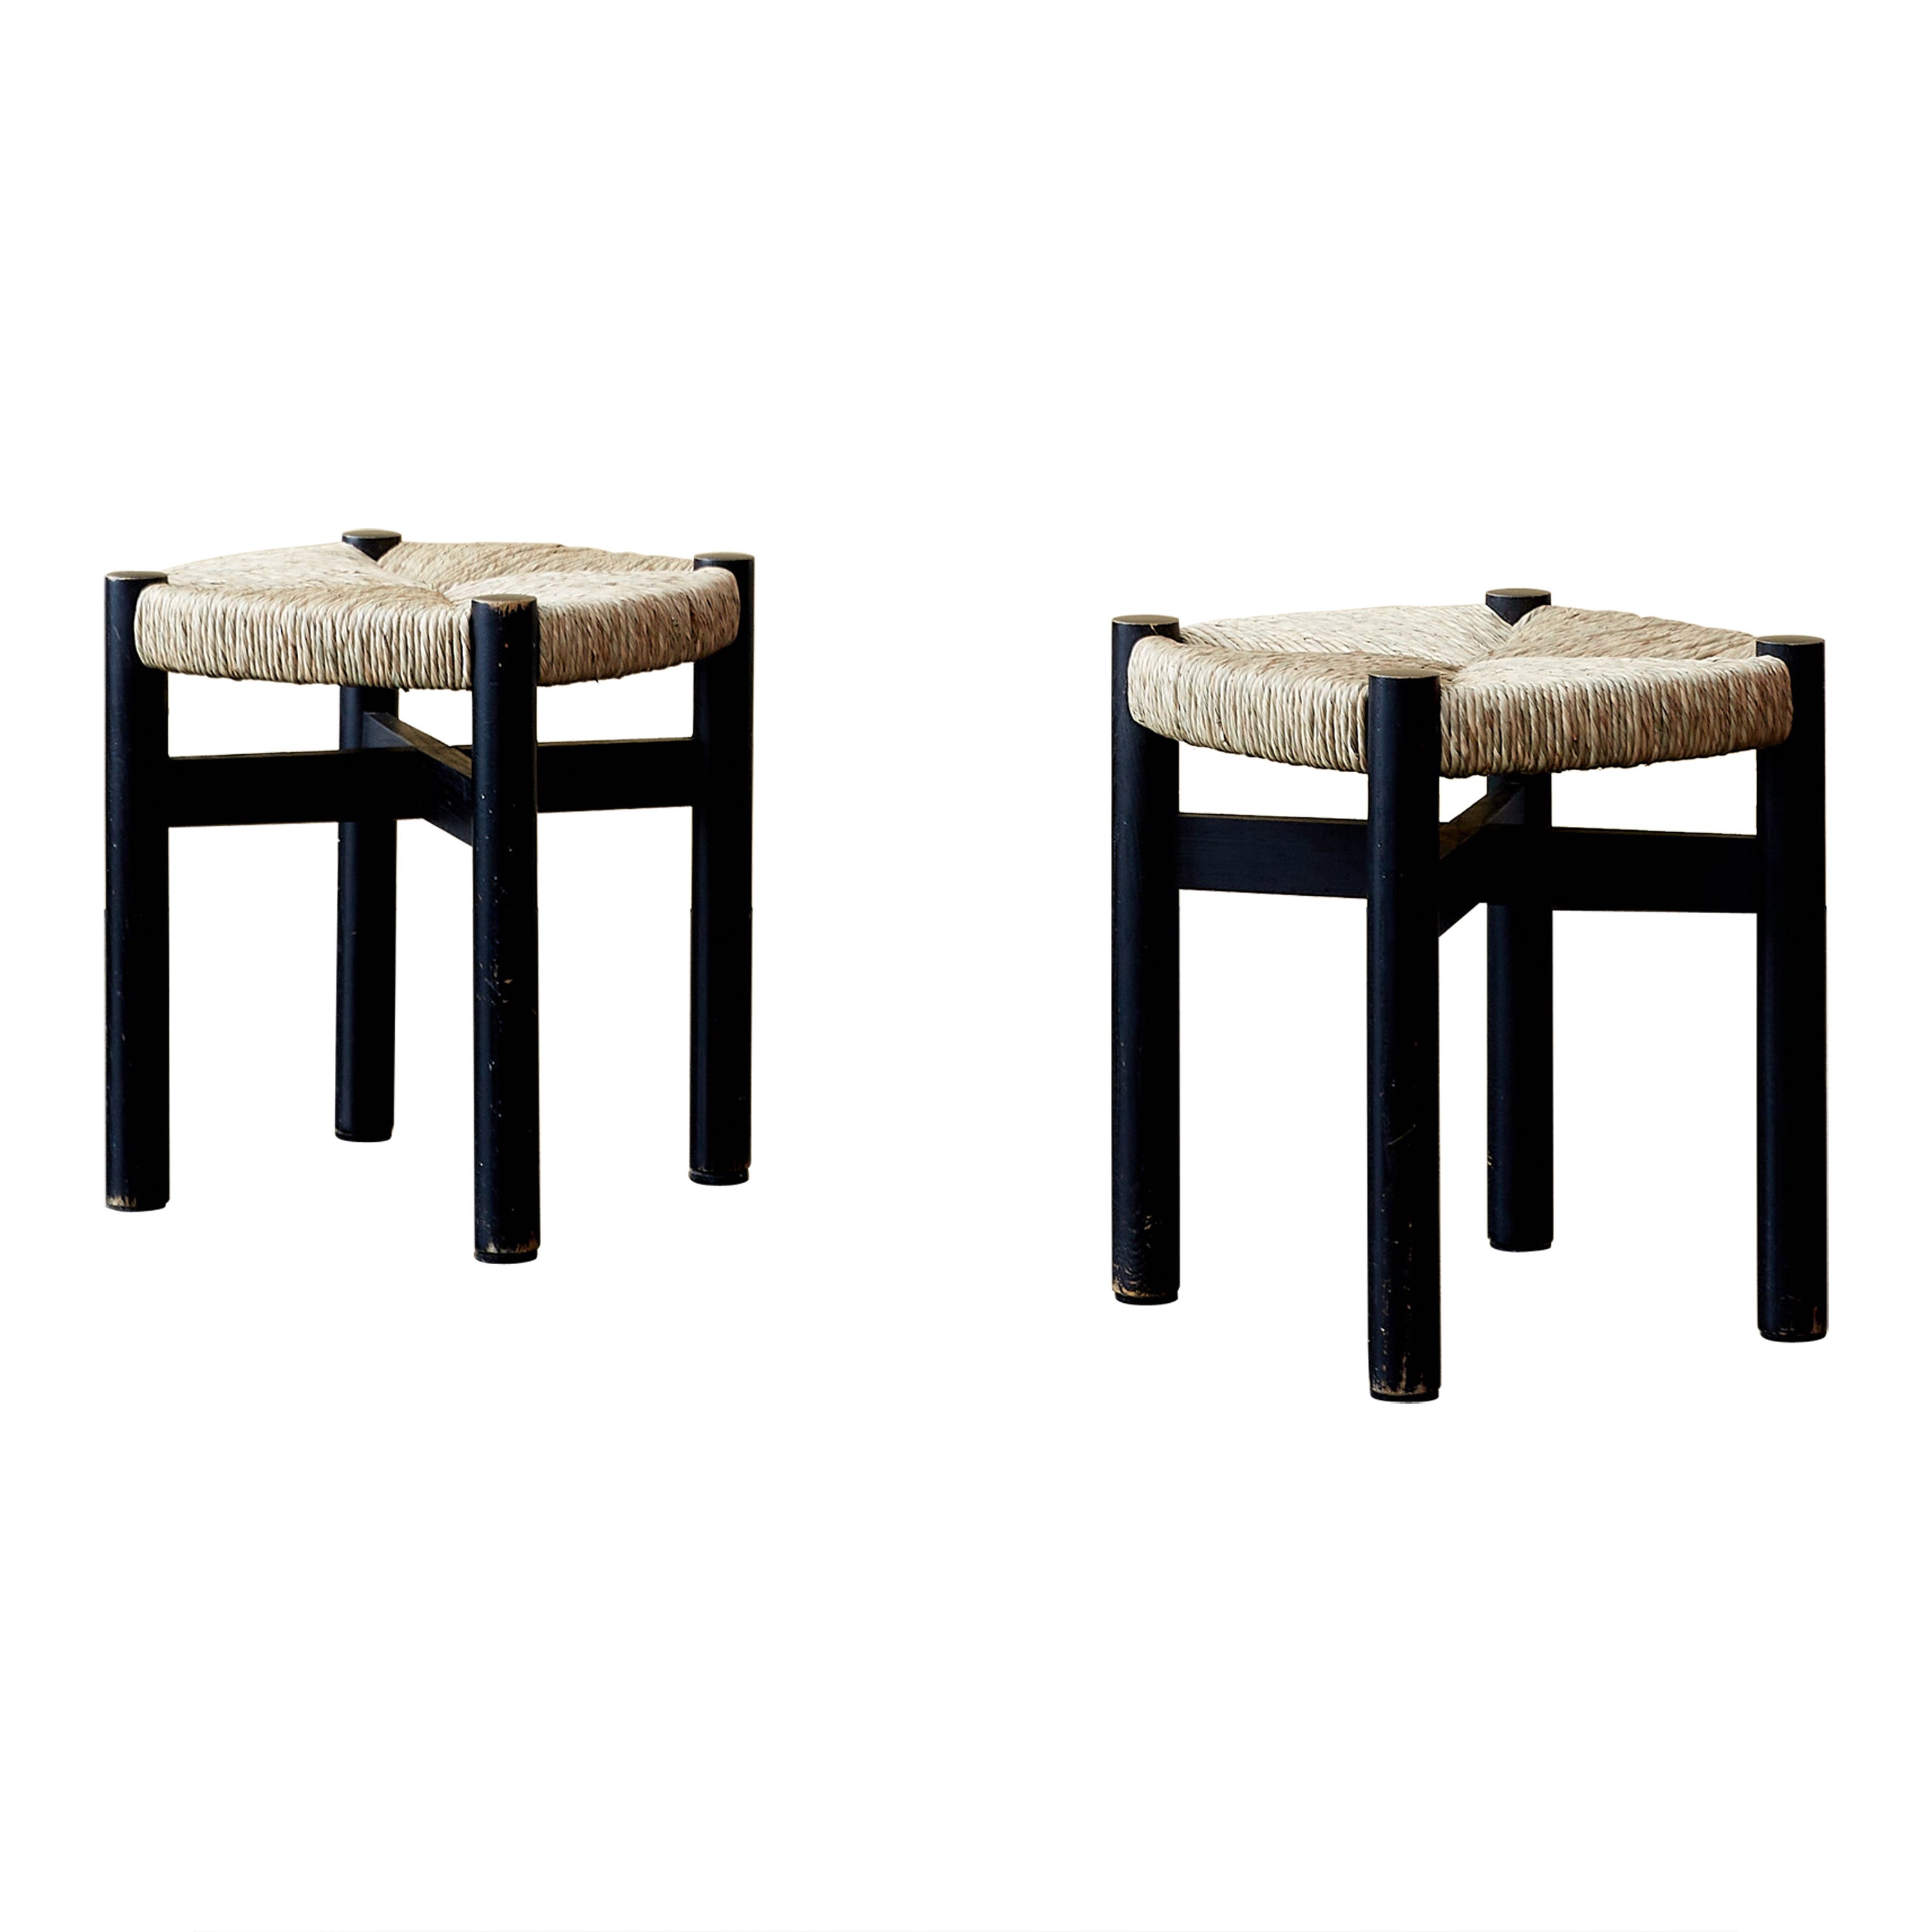 Pair of Charlotte Perriand 'Orcières' Stools in Original Black Paint c. 1960 For Sale